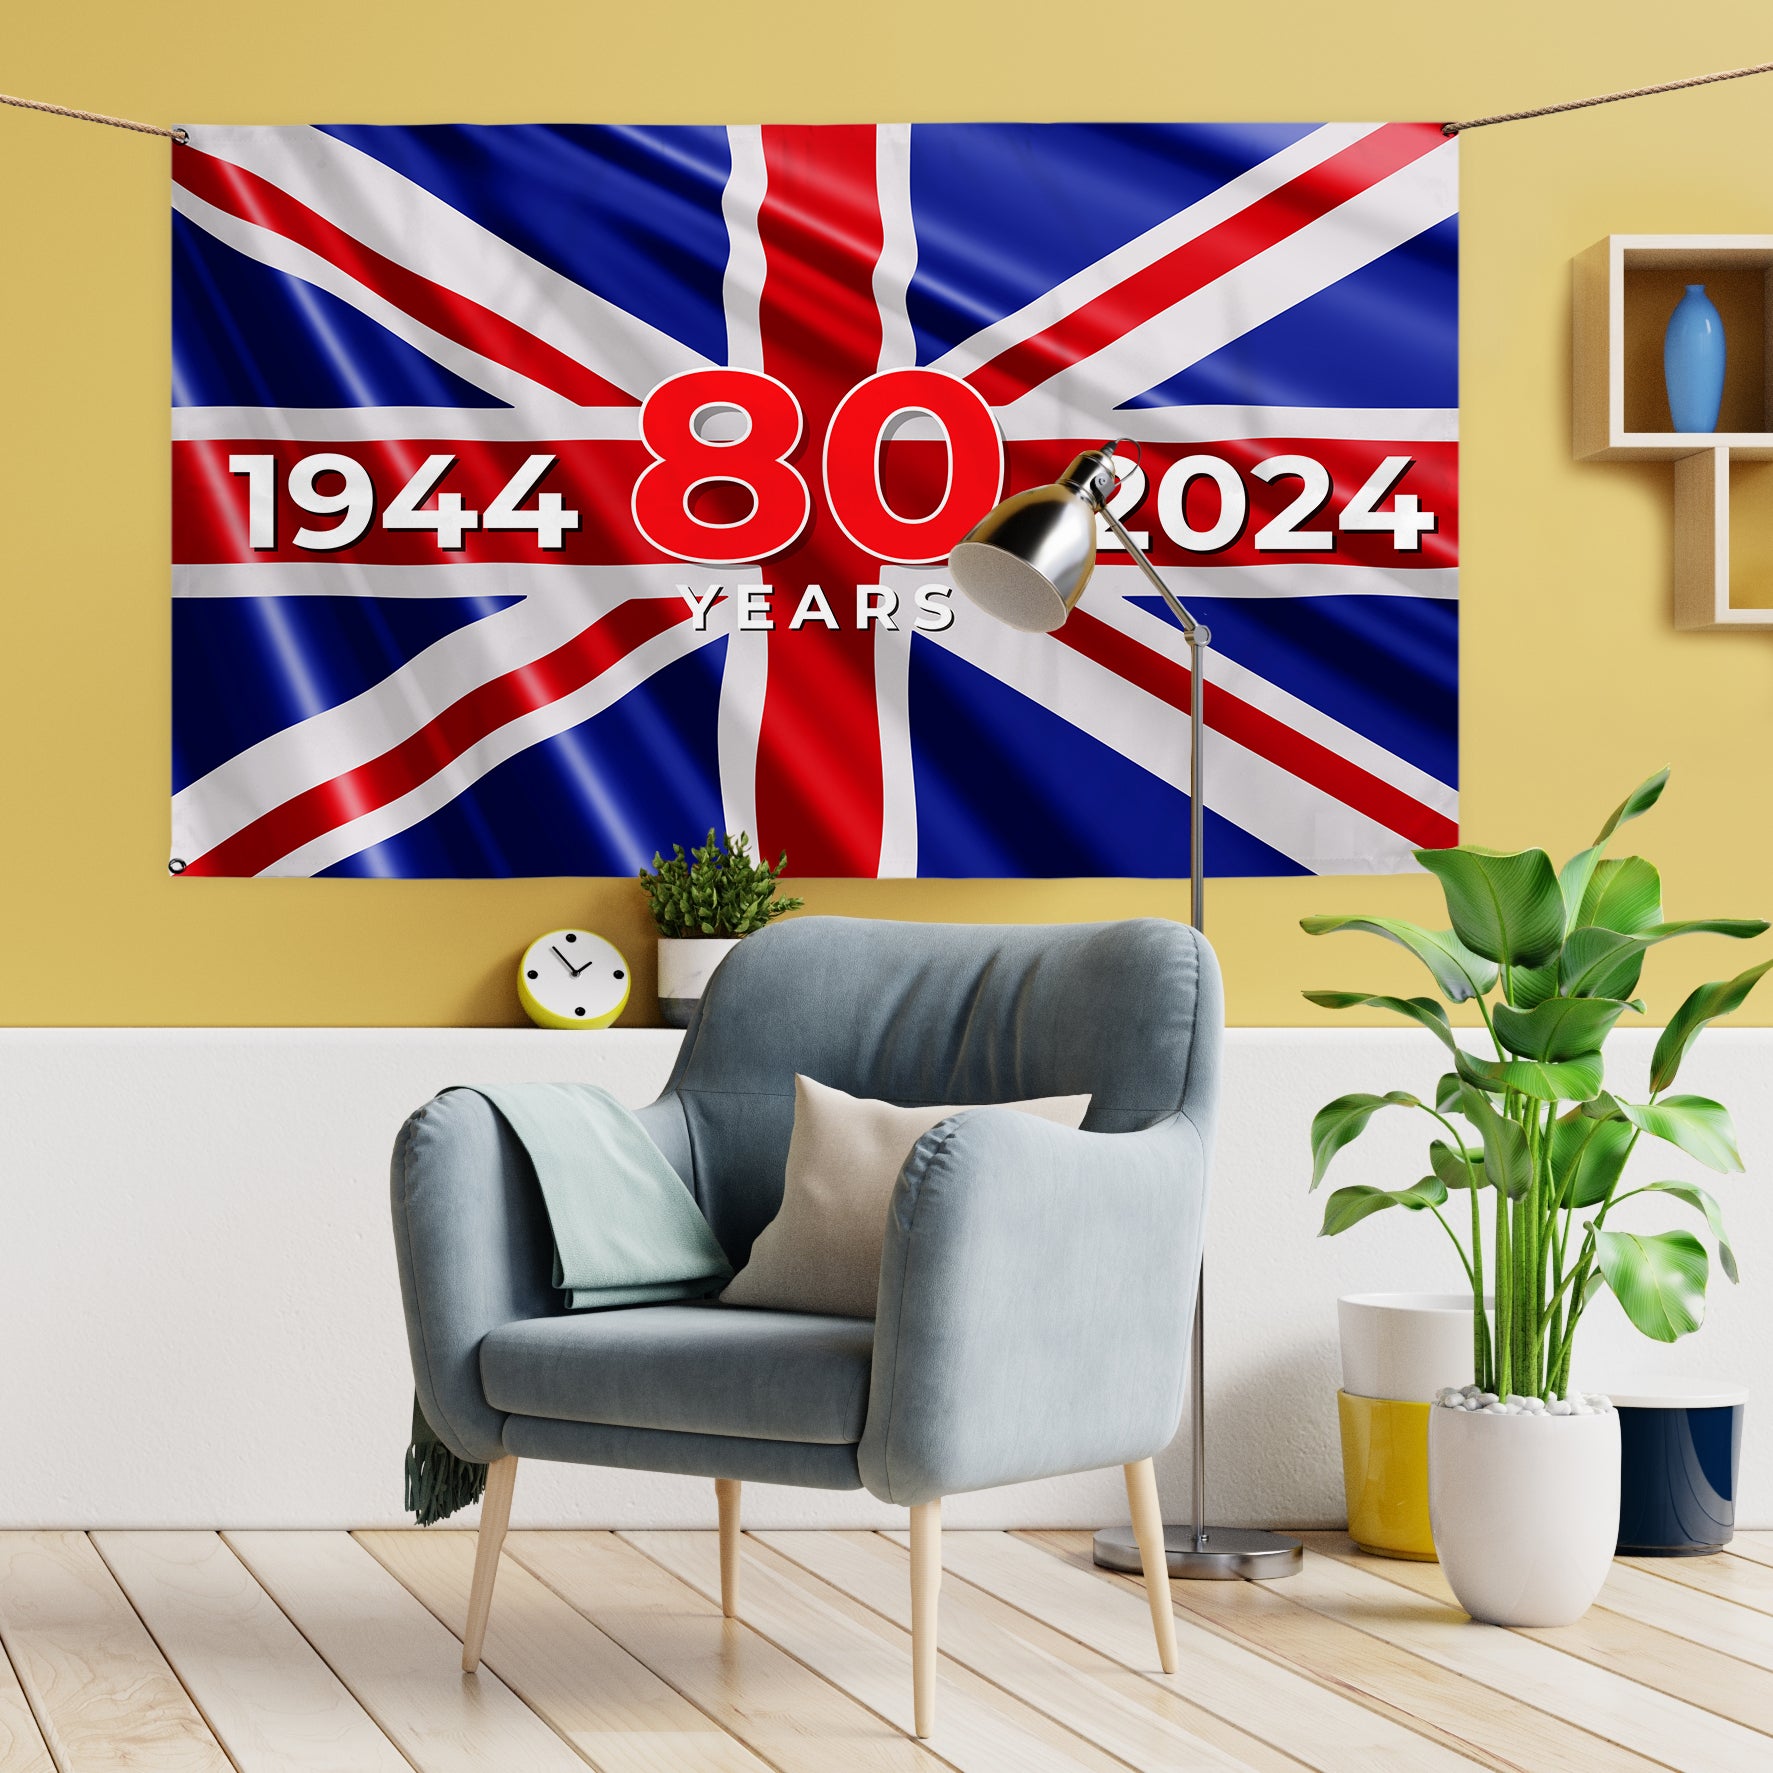 D-Day Union Jack | Banner - 5ft x 3ft